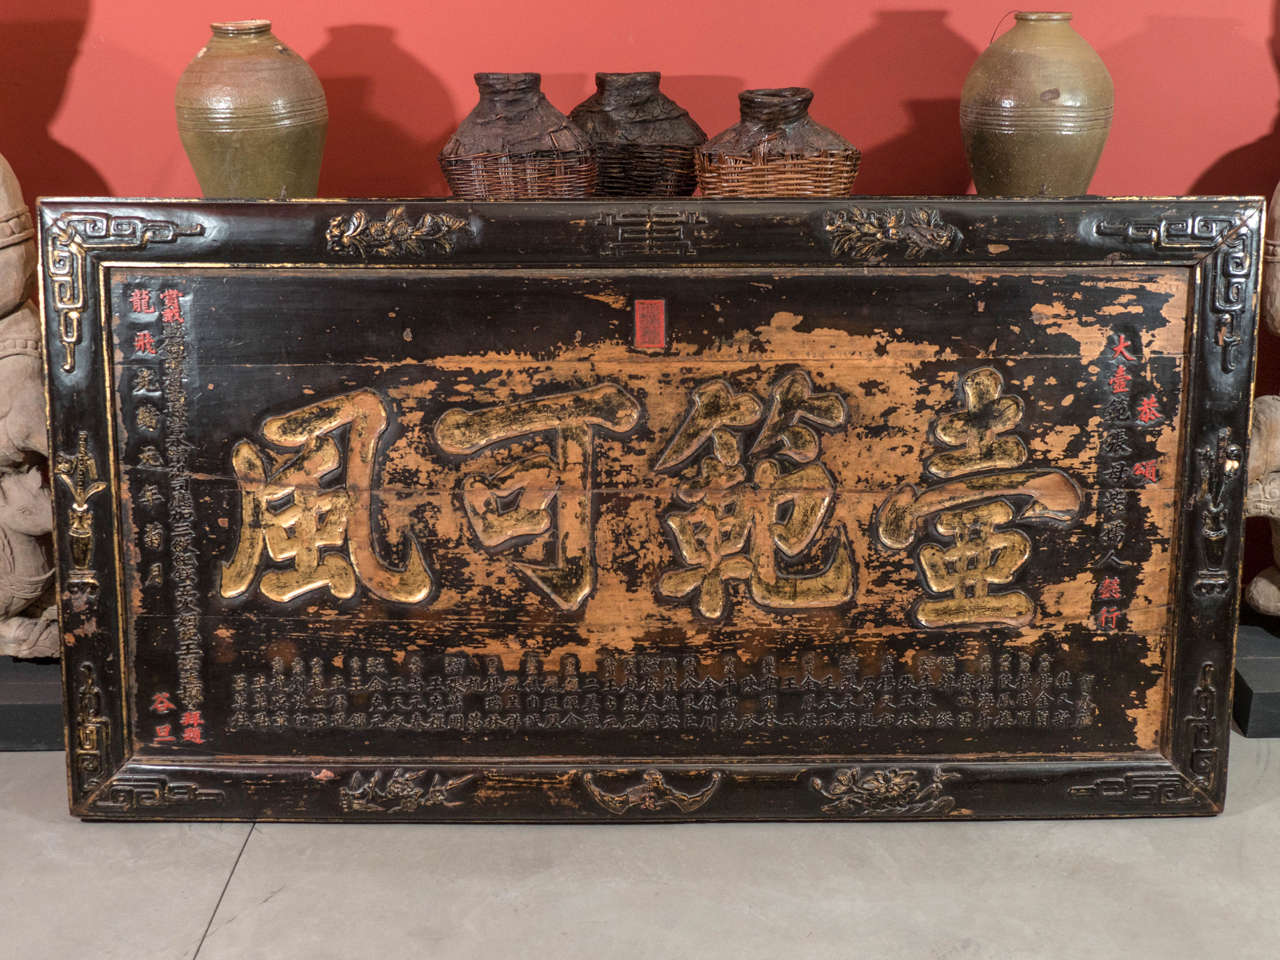 An elaborate and intricately carved master of tea ceremony sign inscribed with the names of the master and his students, as well as the date. Beautiful gold lacquer highlights the large central characters. Detailed carvings appear on the frame of